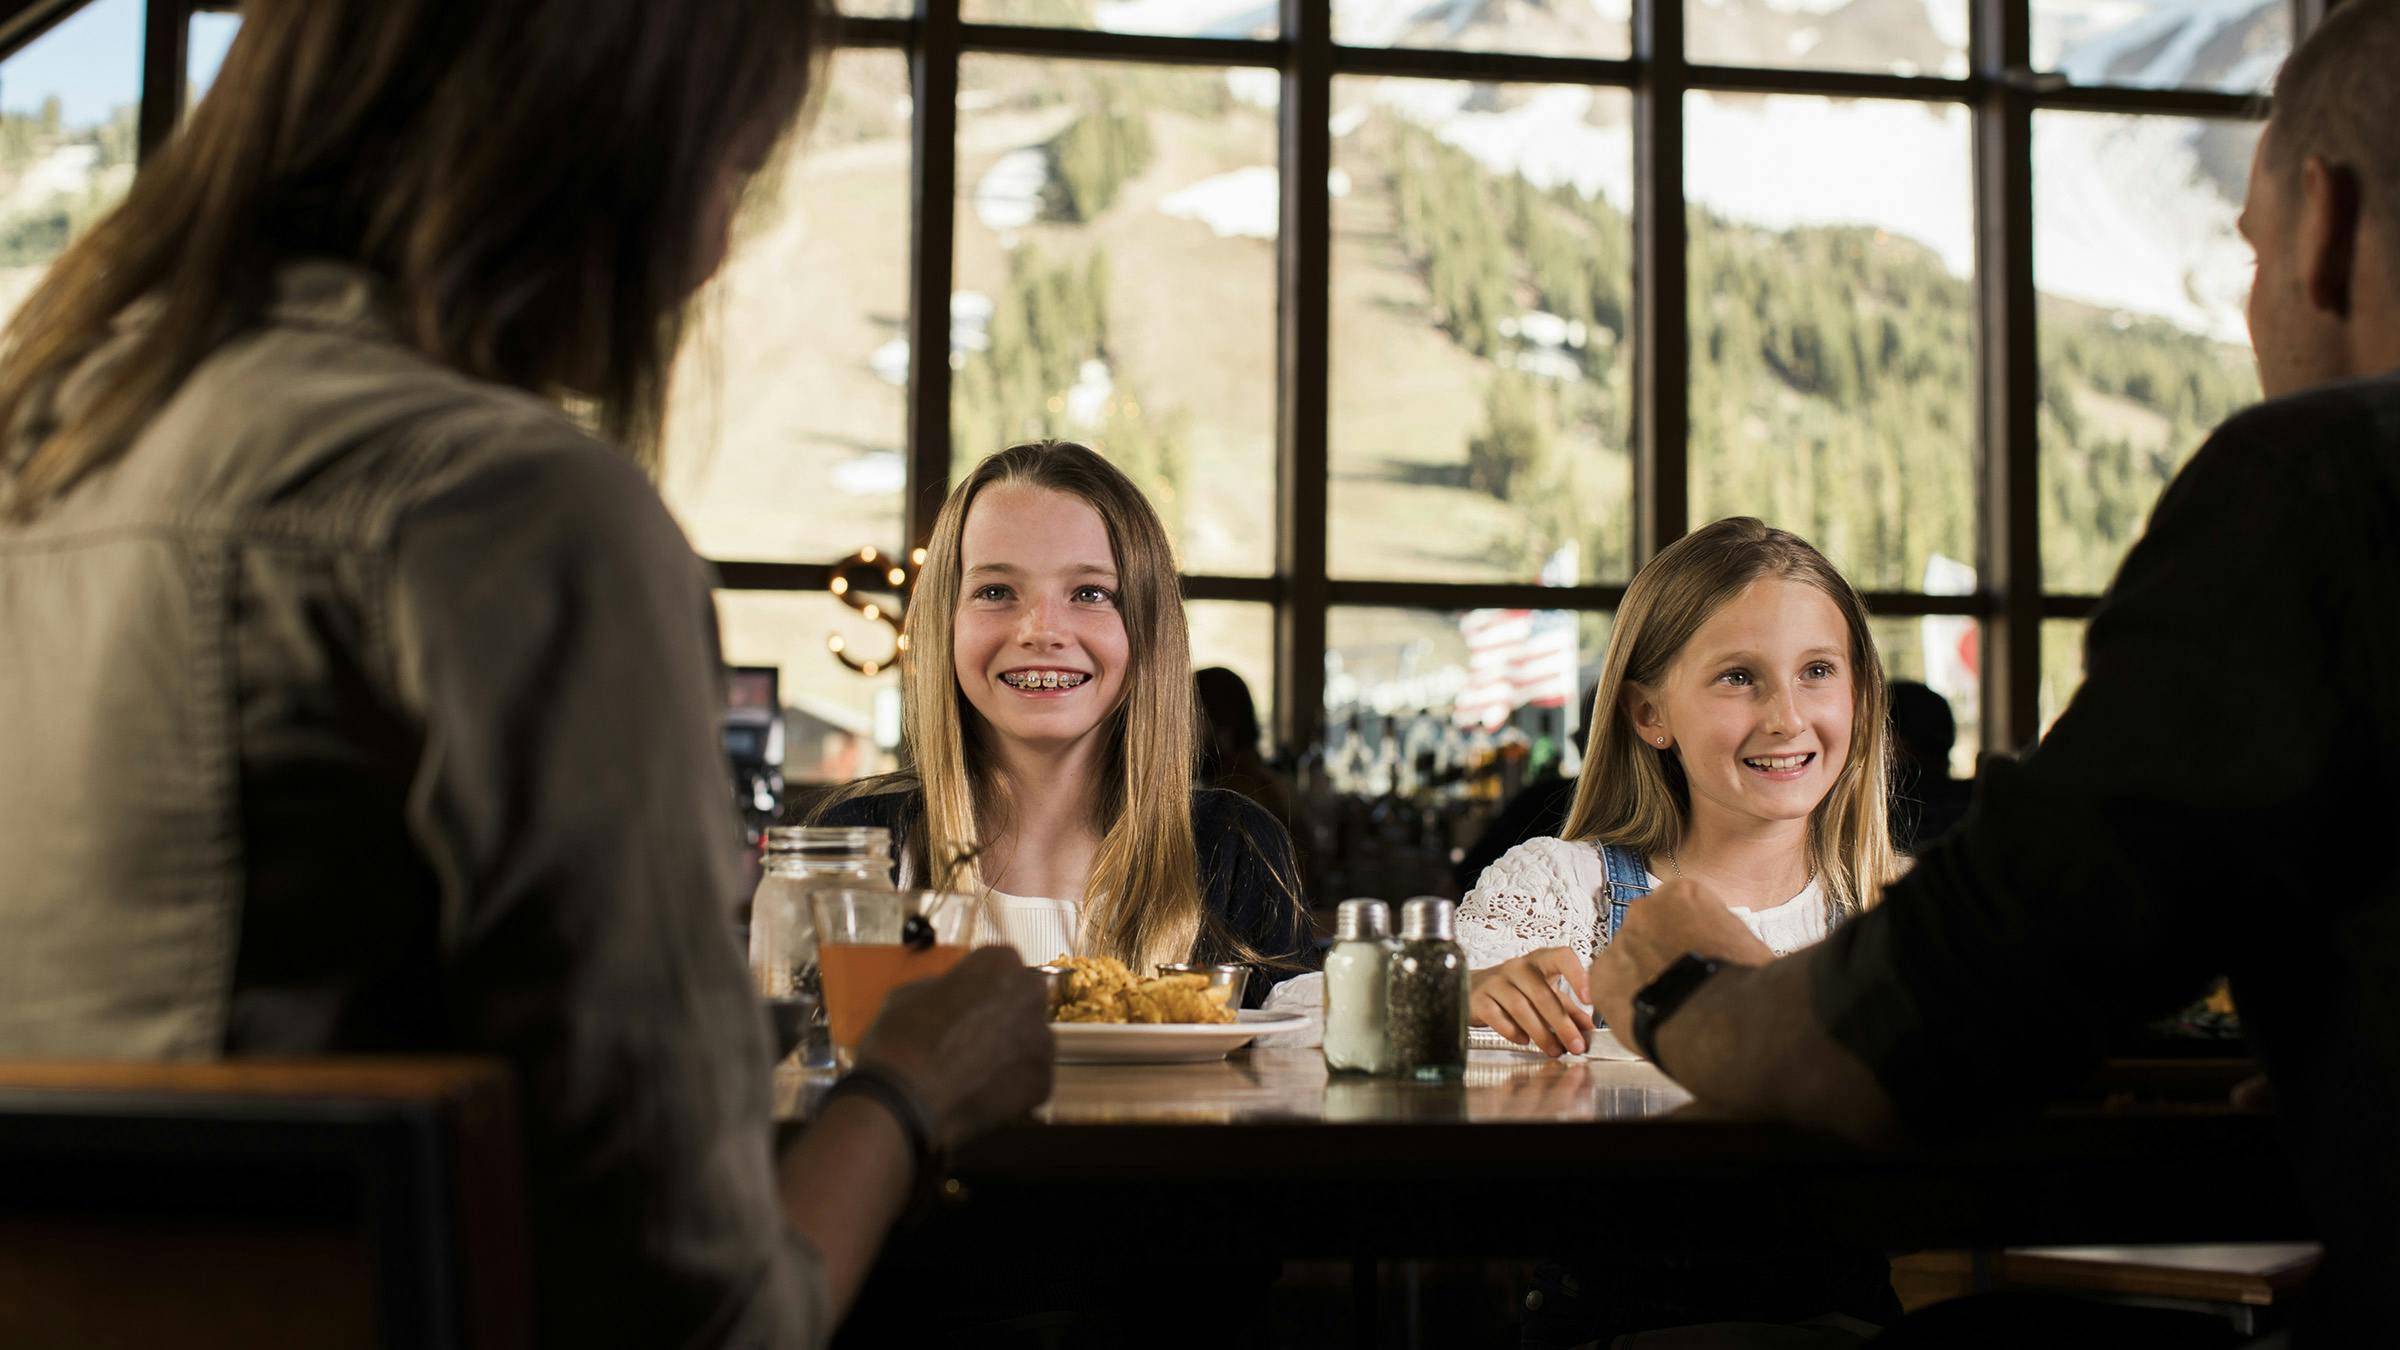 Family dining at Mountainside Bar and Grill with view of Mammoth Mountain outside of the window